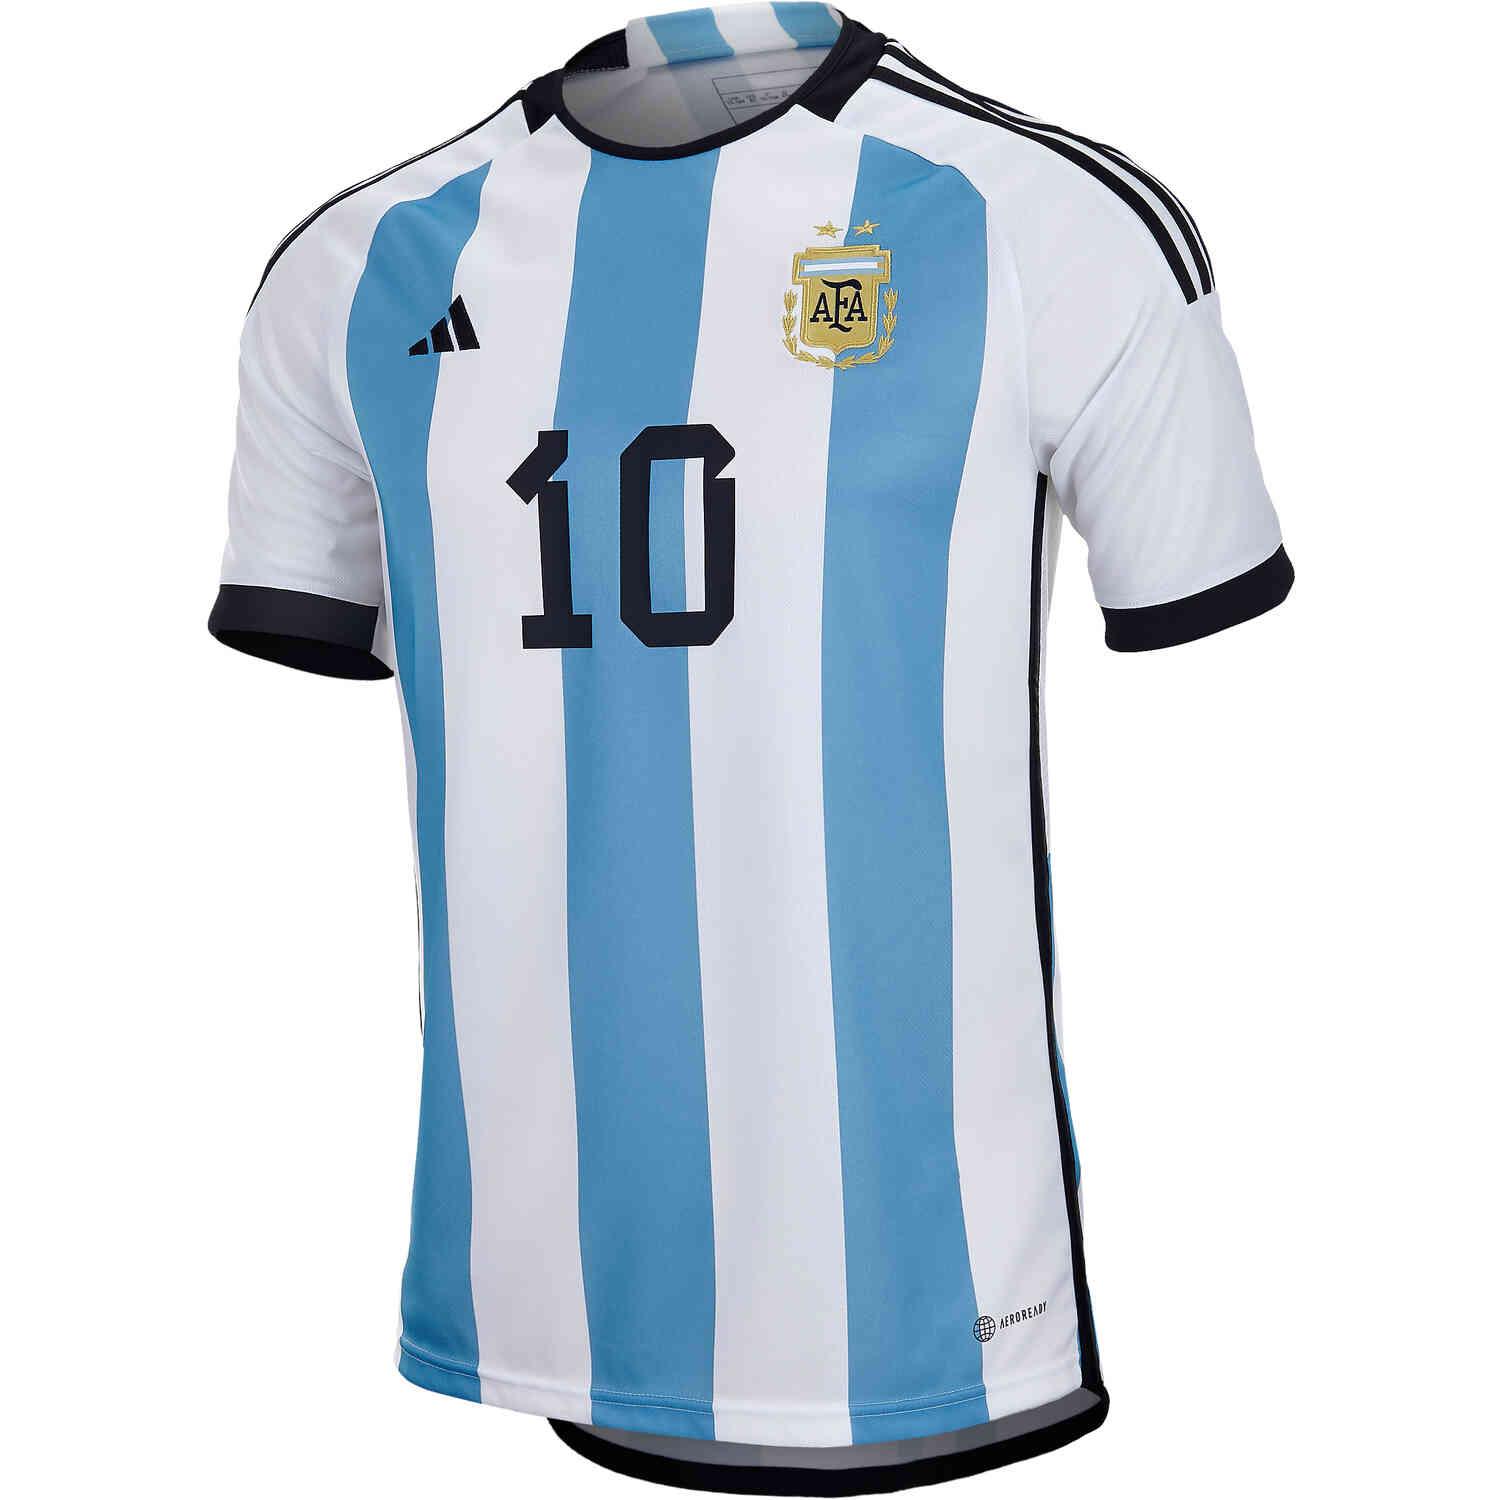 Messi Jersey Youth